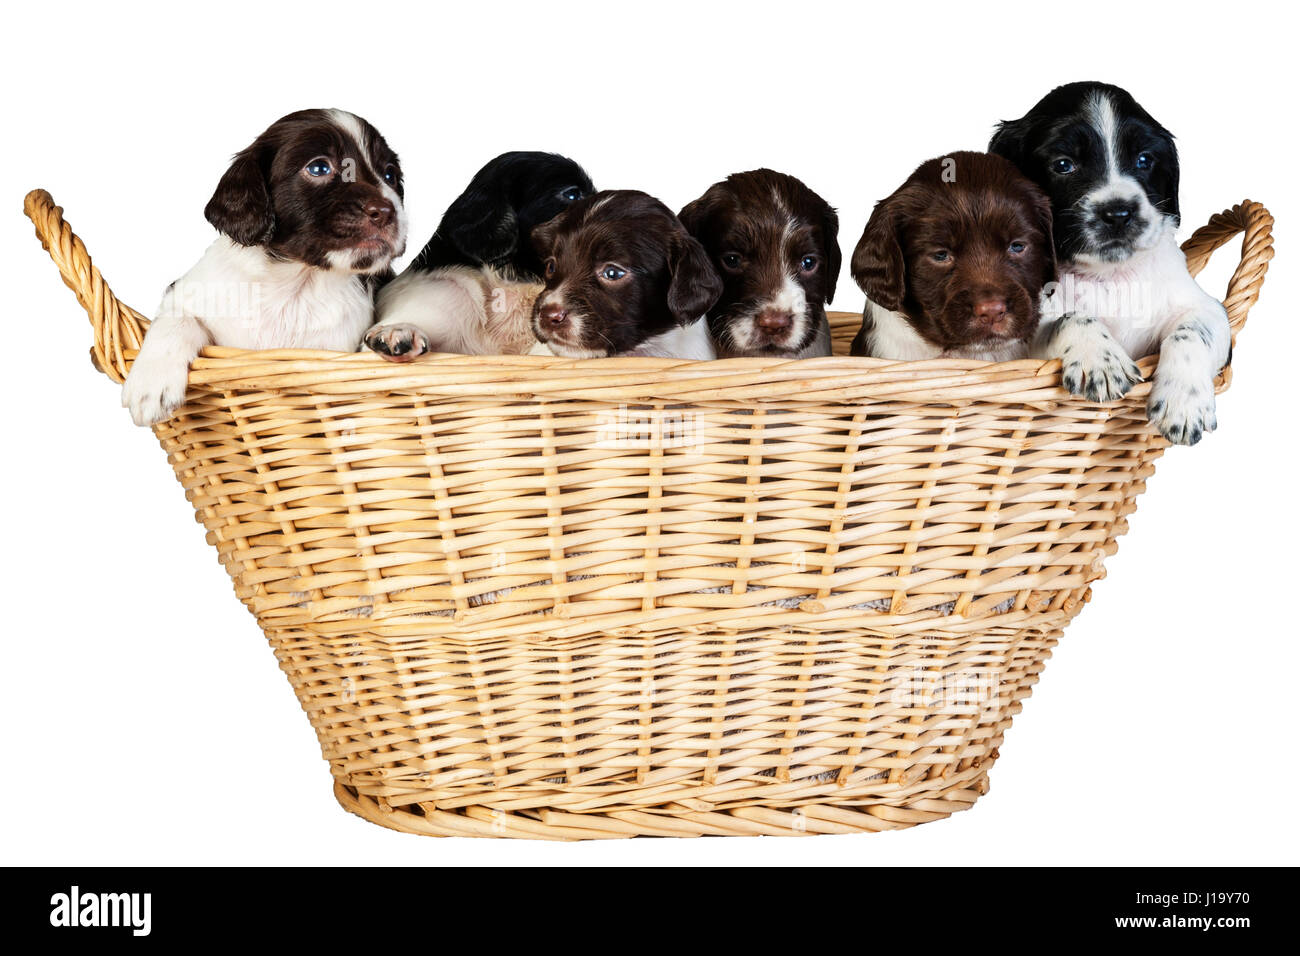 Several 4 week old English Springer Spaniel puppys in a wicker basket Stock Photo